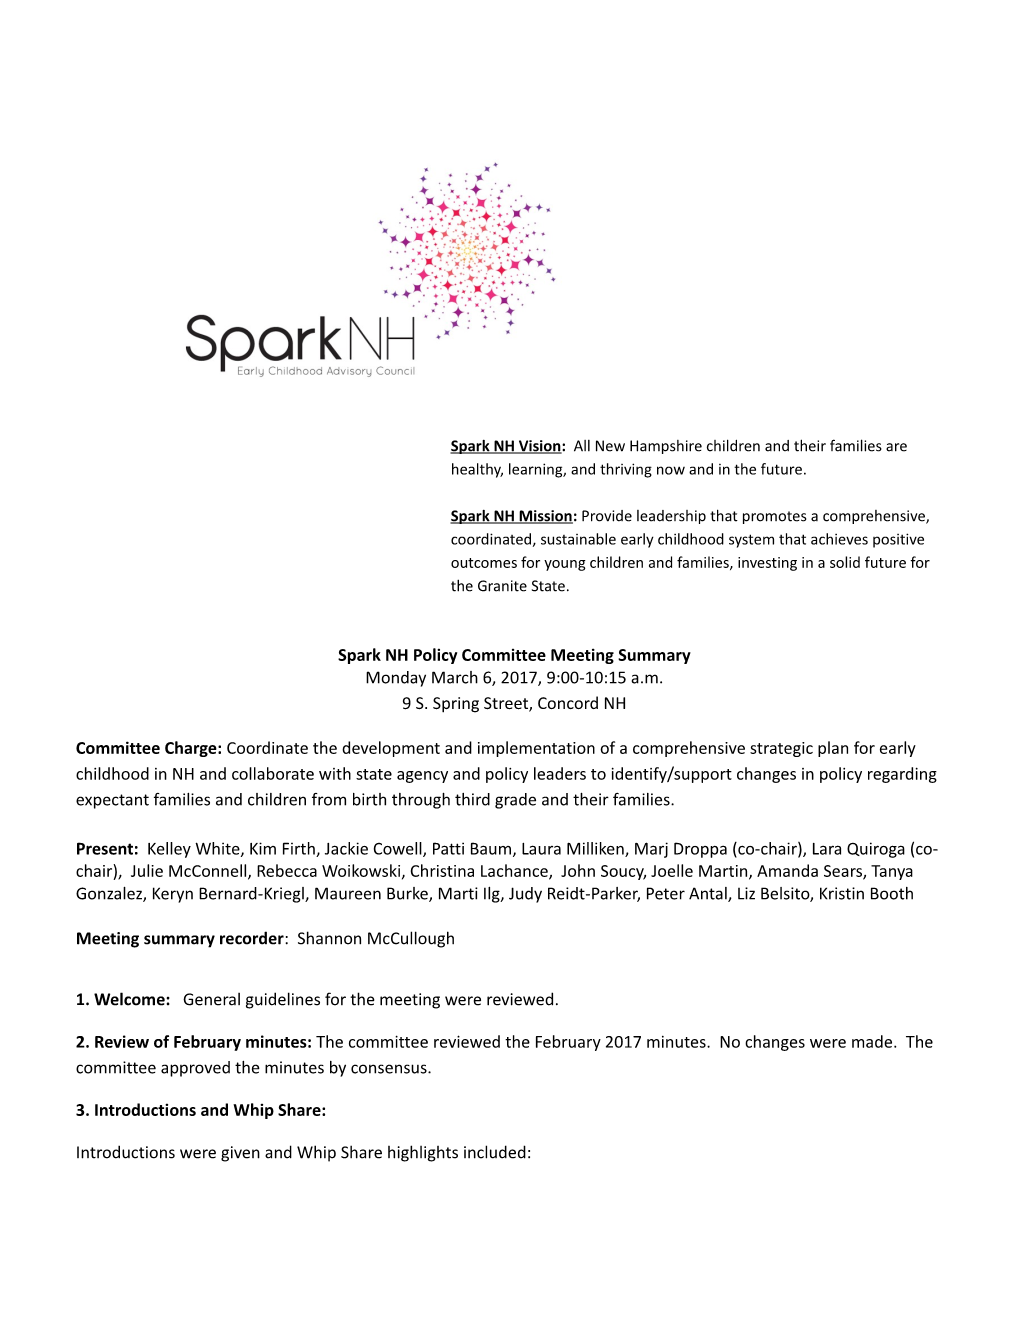 Spark NH Policy Committee Meeting Summary